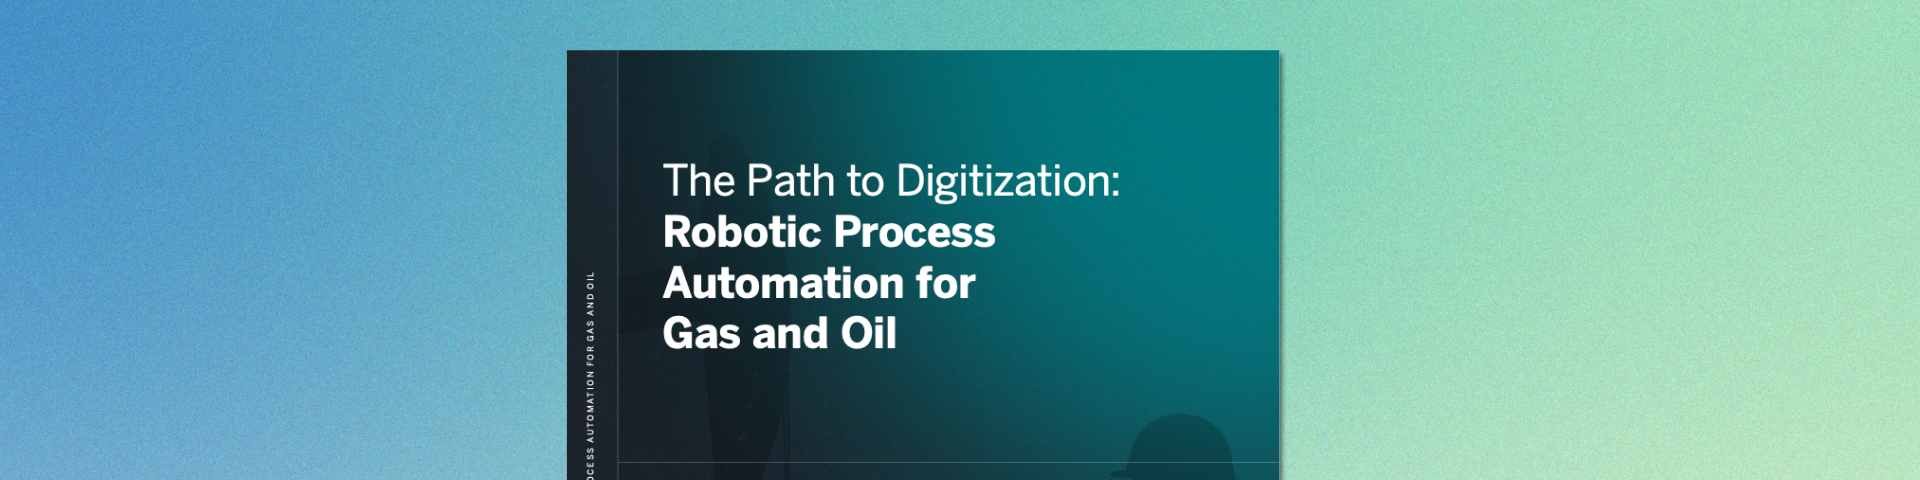 The Path to Digitization Robotic Process Automation for Gas & Oil eBook  - Ripcord